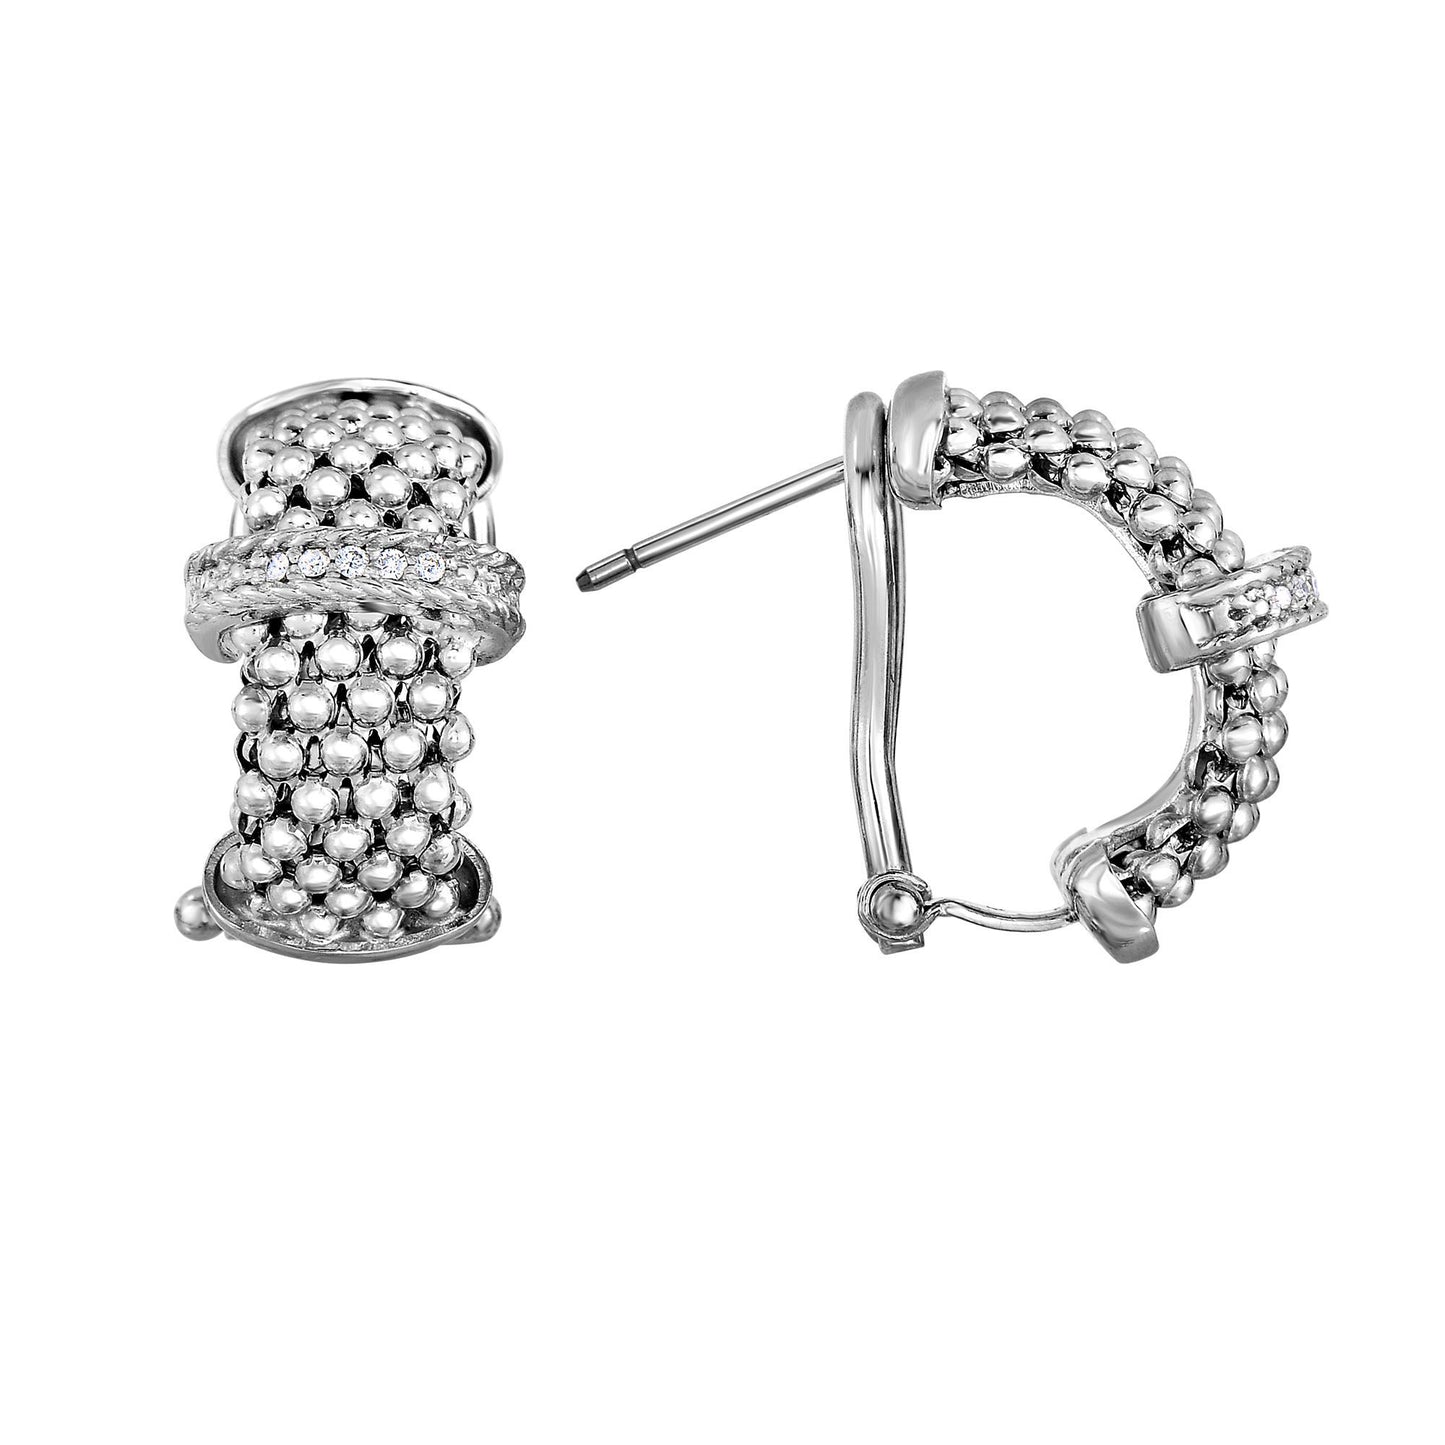 Silver with Rhodium Finish 18X5mm Popcorn Textured Half Moon Post Earring with Center 0.06Ct.Diamond Bar with Omega Clasp